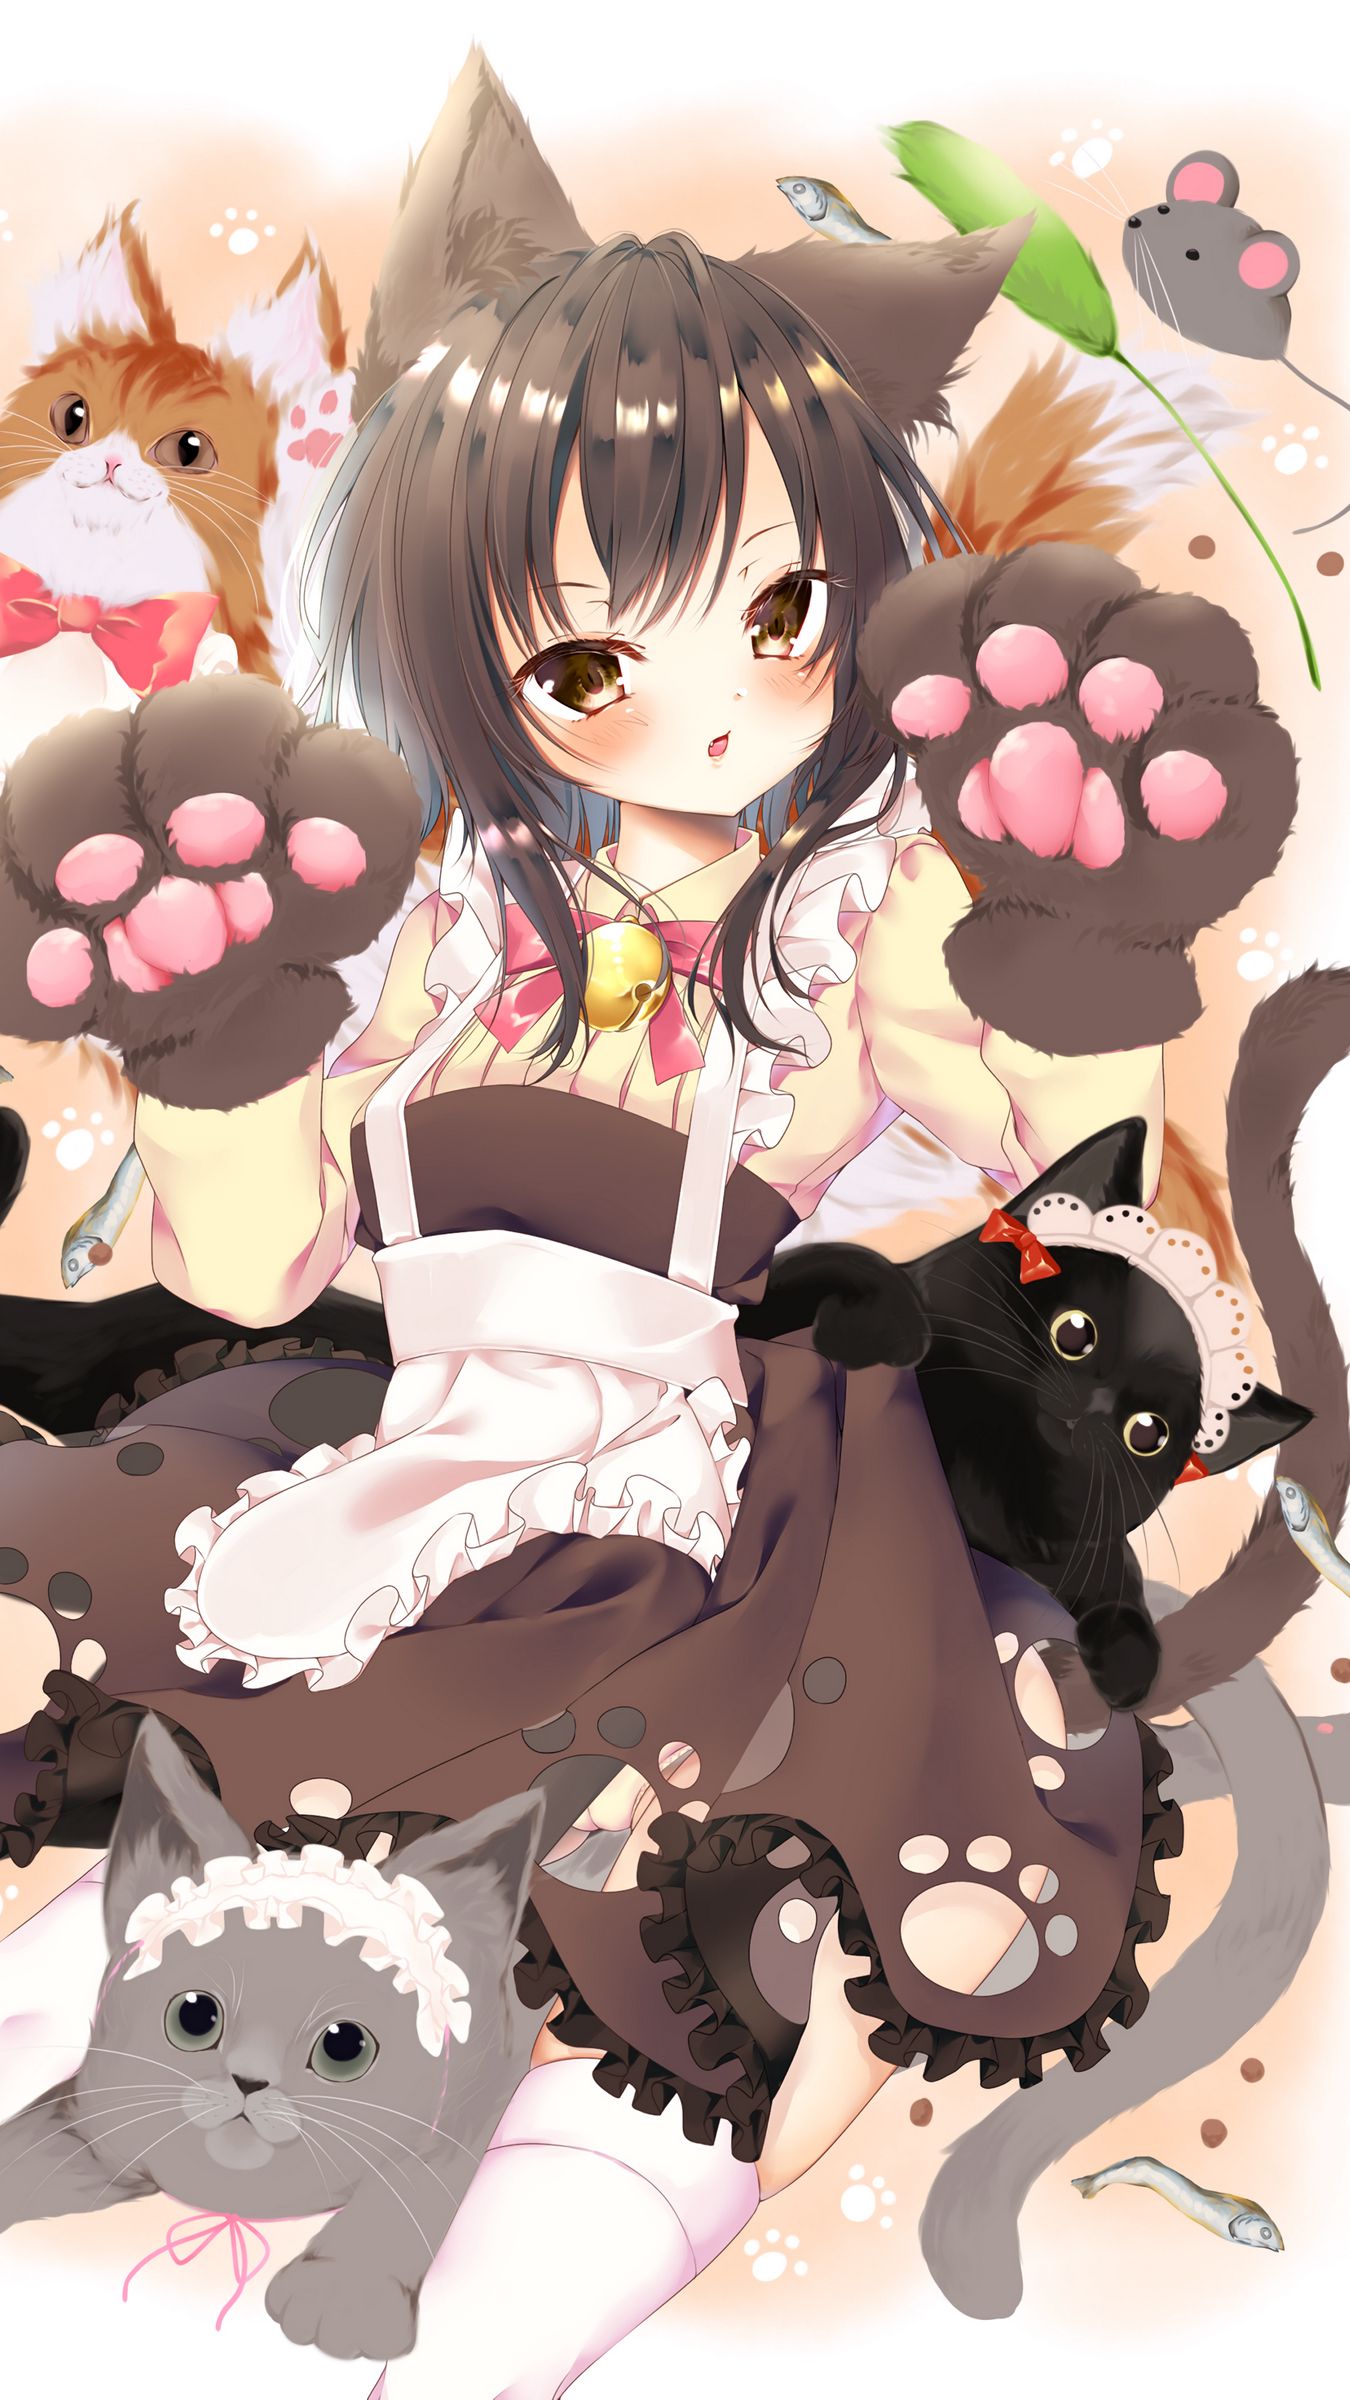 Download wallpaper 1350x2400 neko, girl, ears, cats, cute, anime iphone  8+/7+/6s+/6+ for parallax hd background